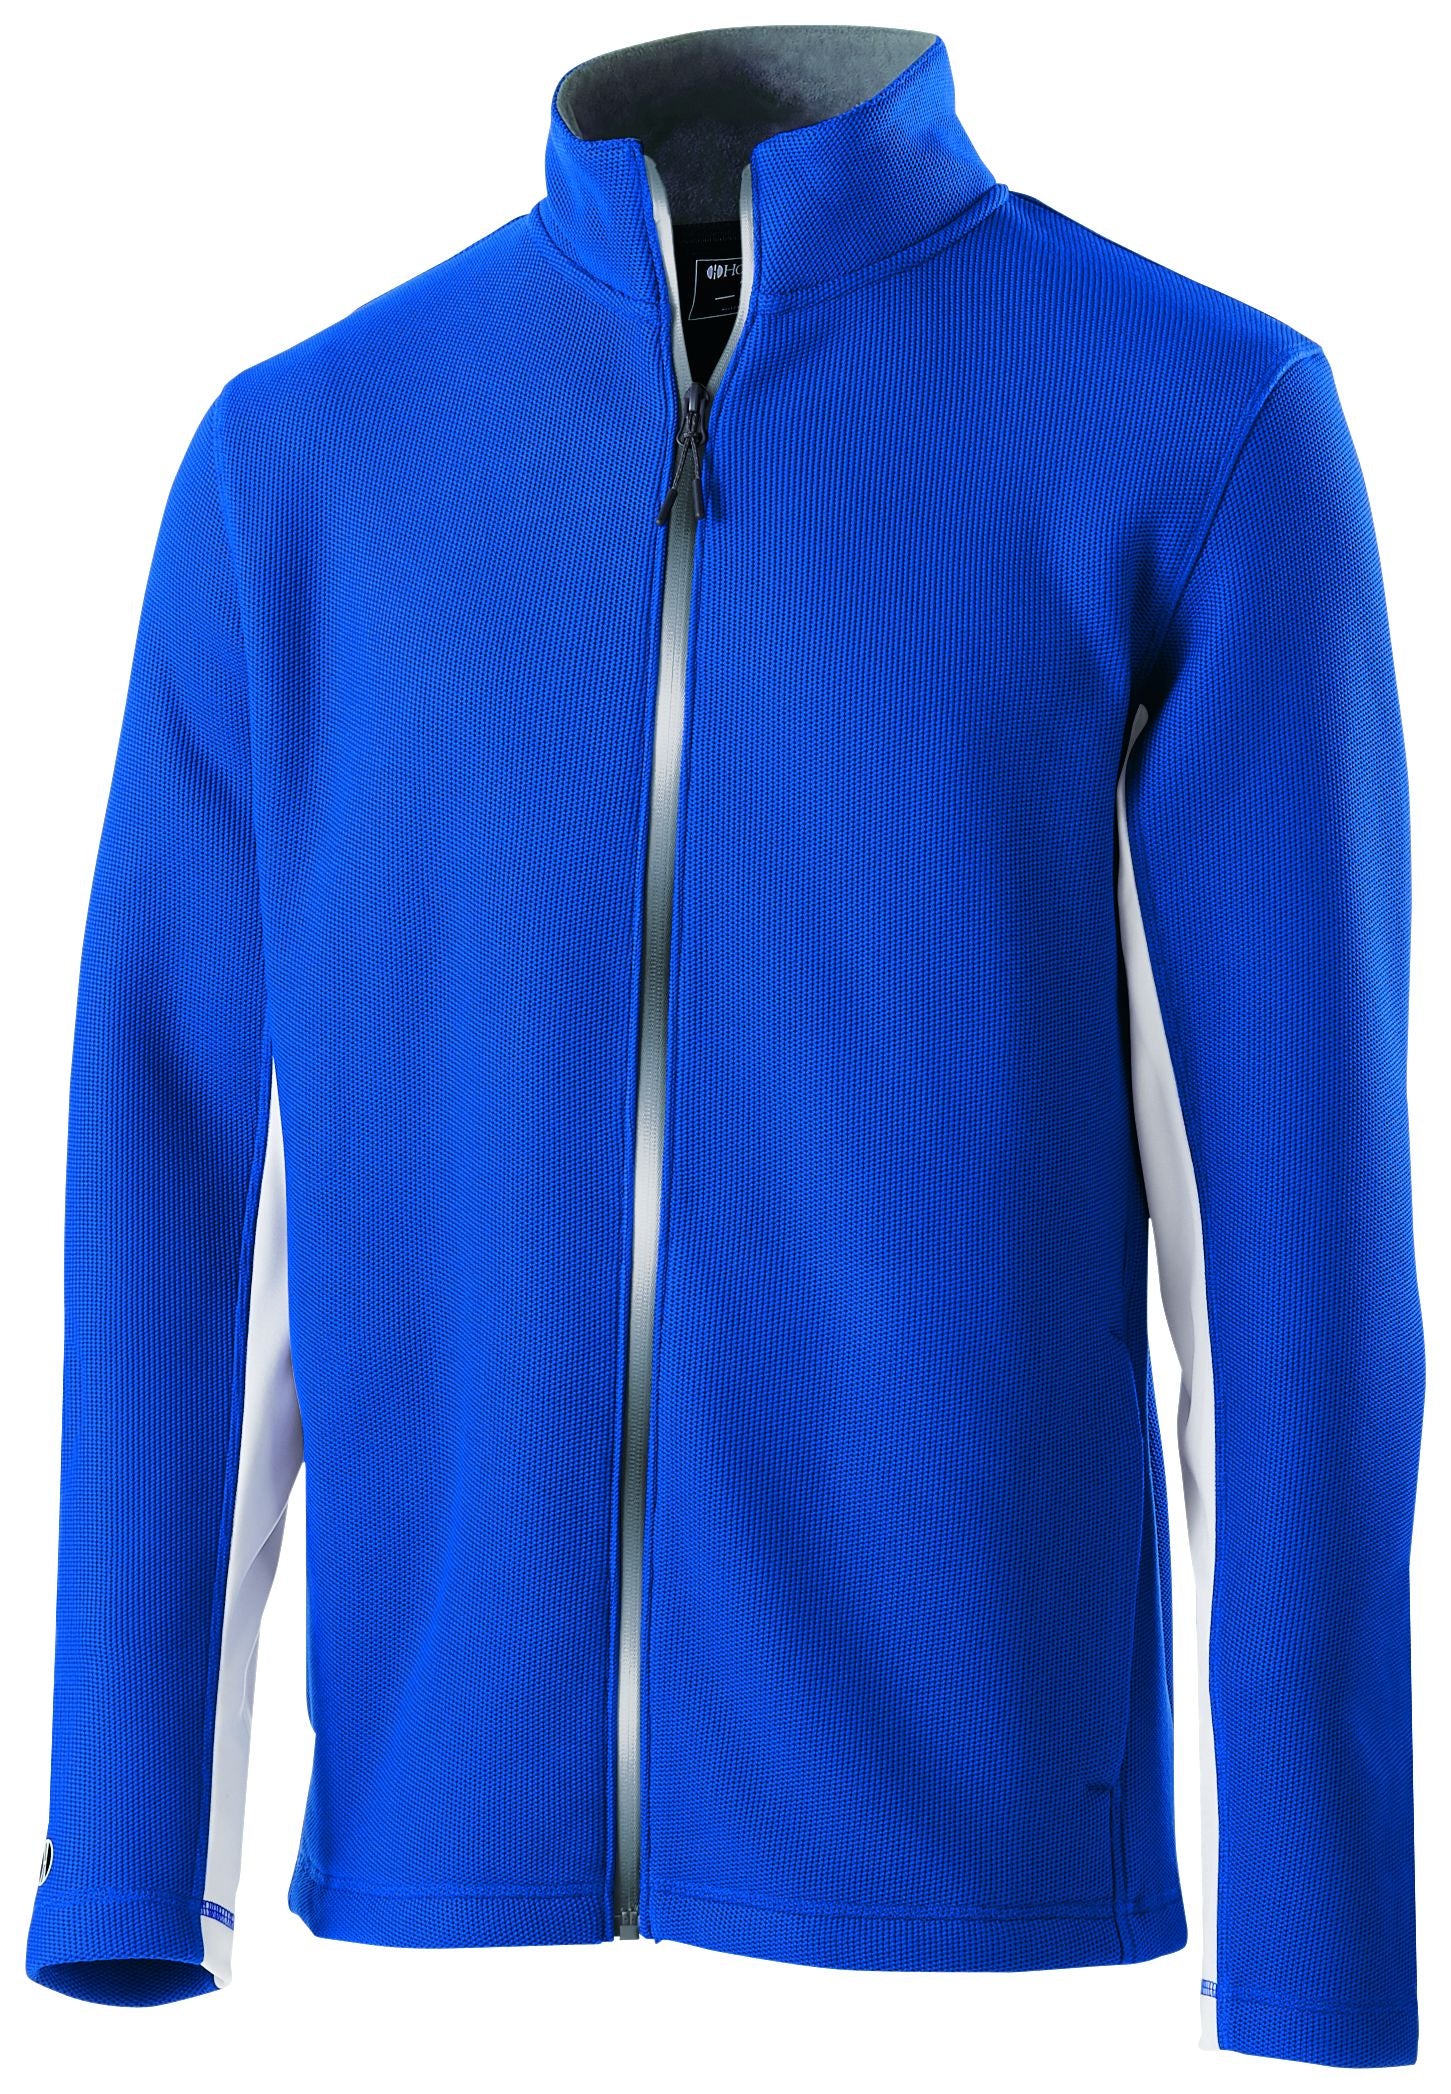 Holloway Invert Jacket in Royal/White  -Part of the Adult, Adult-Jacket, Holloway, Outerwear, Invert-Collection product lines at KanaleyCreations.com